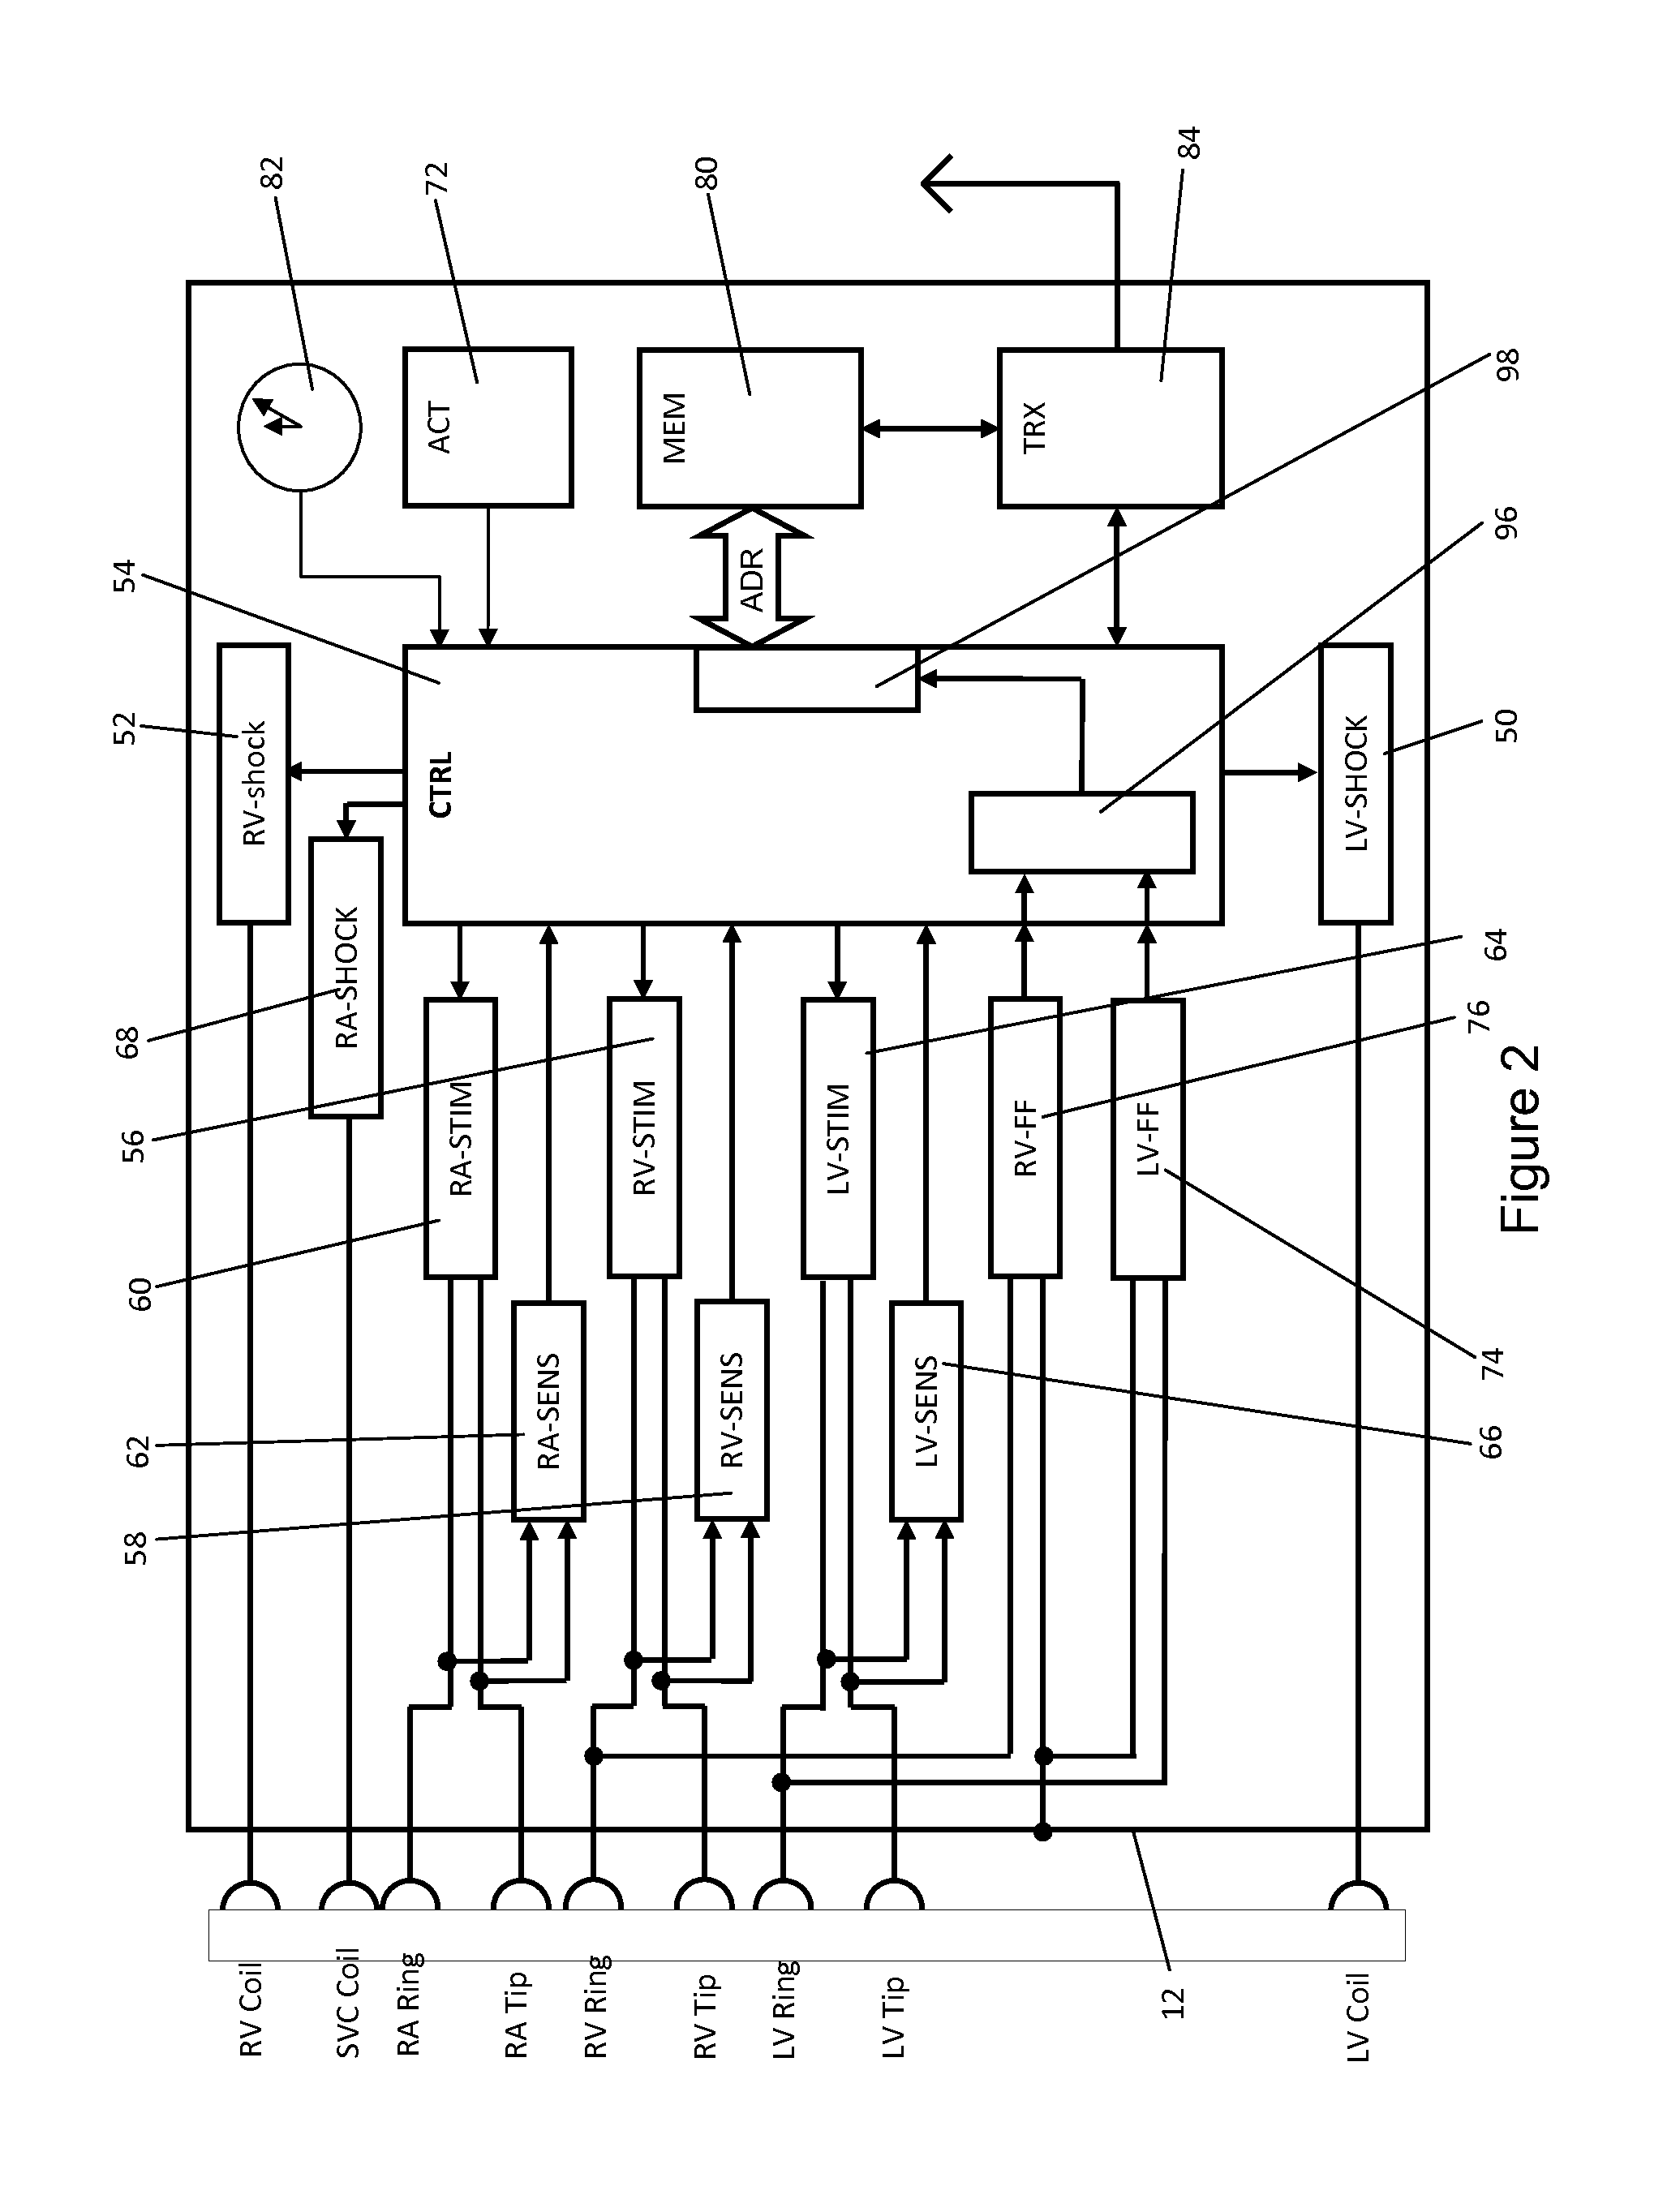 Device and method for fusion beat detection